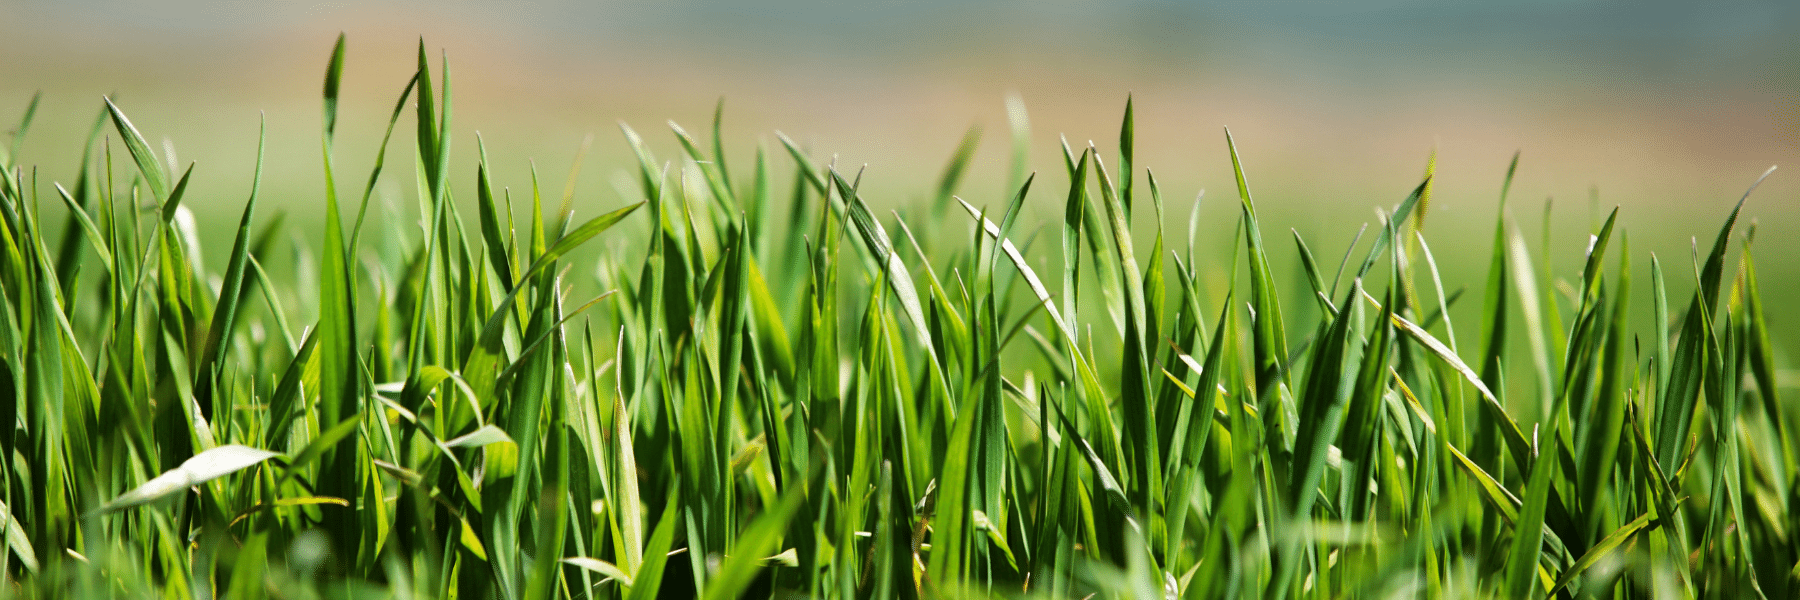 How to seed your lawn header image (1800 × 600 px)